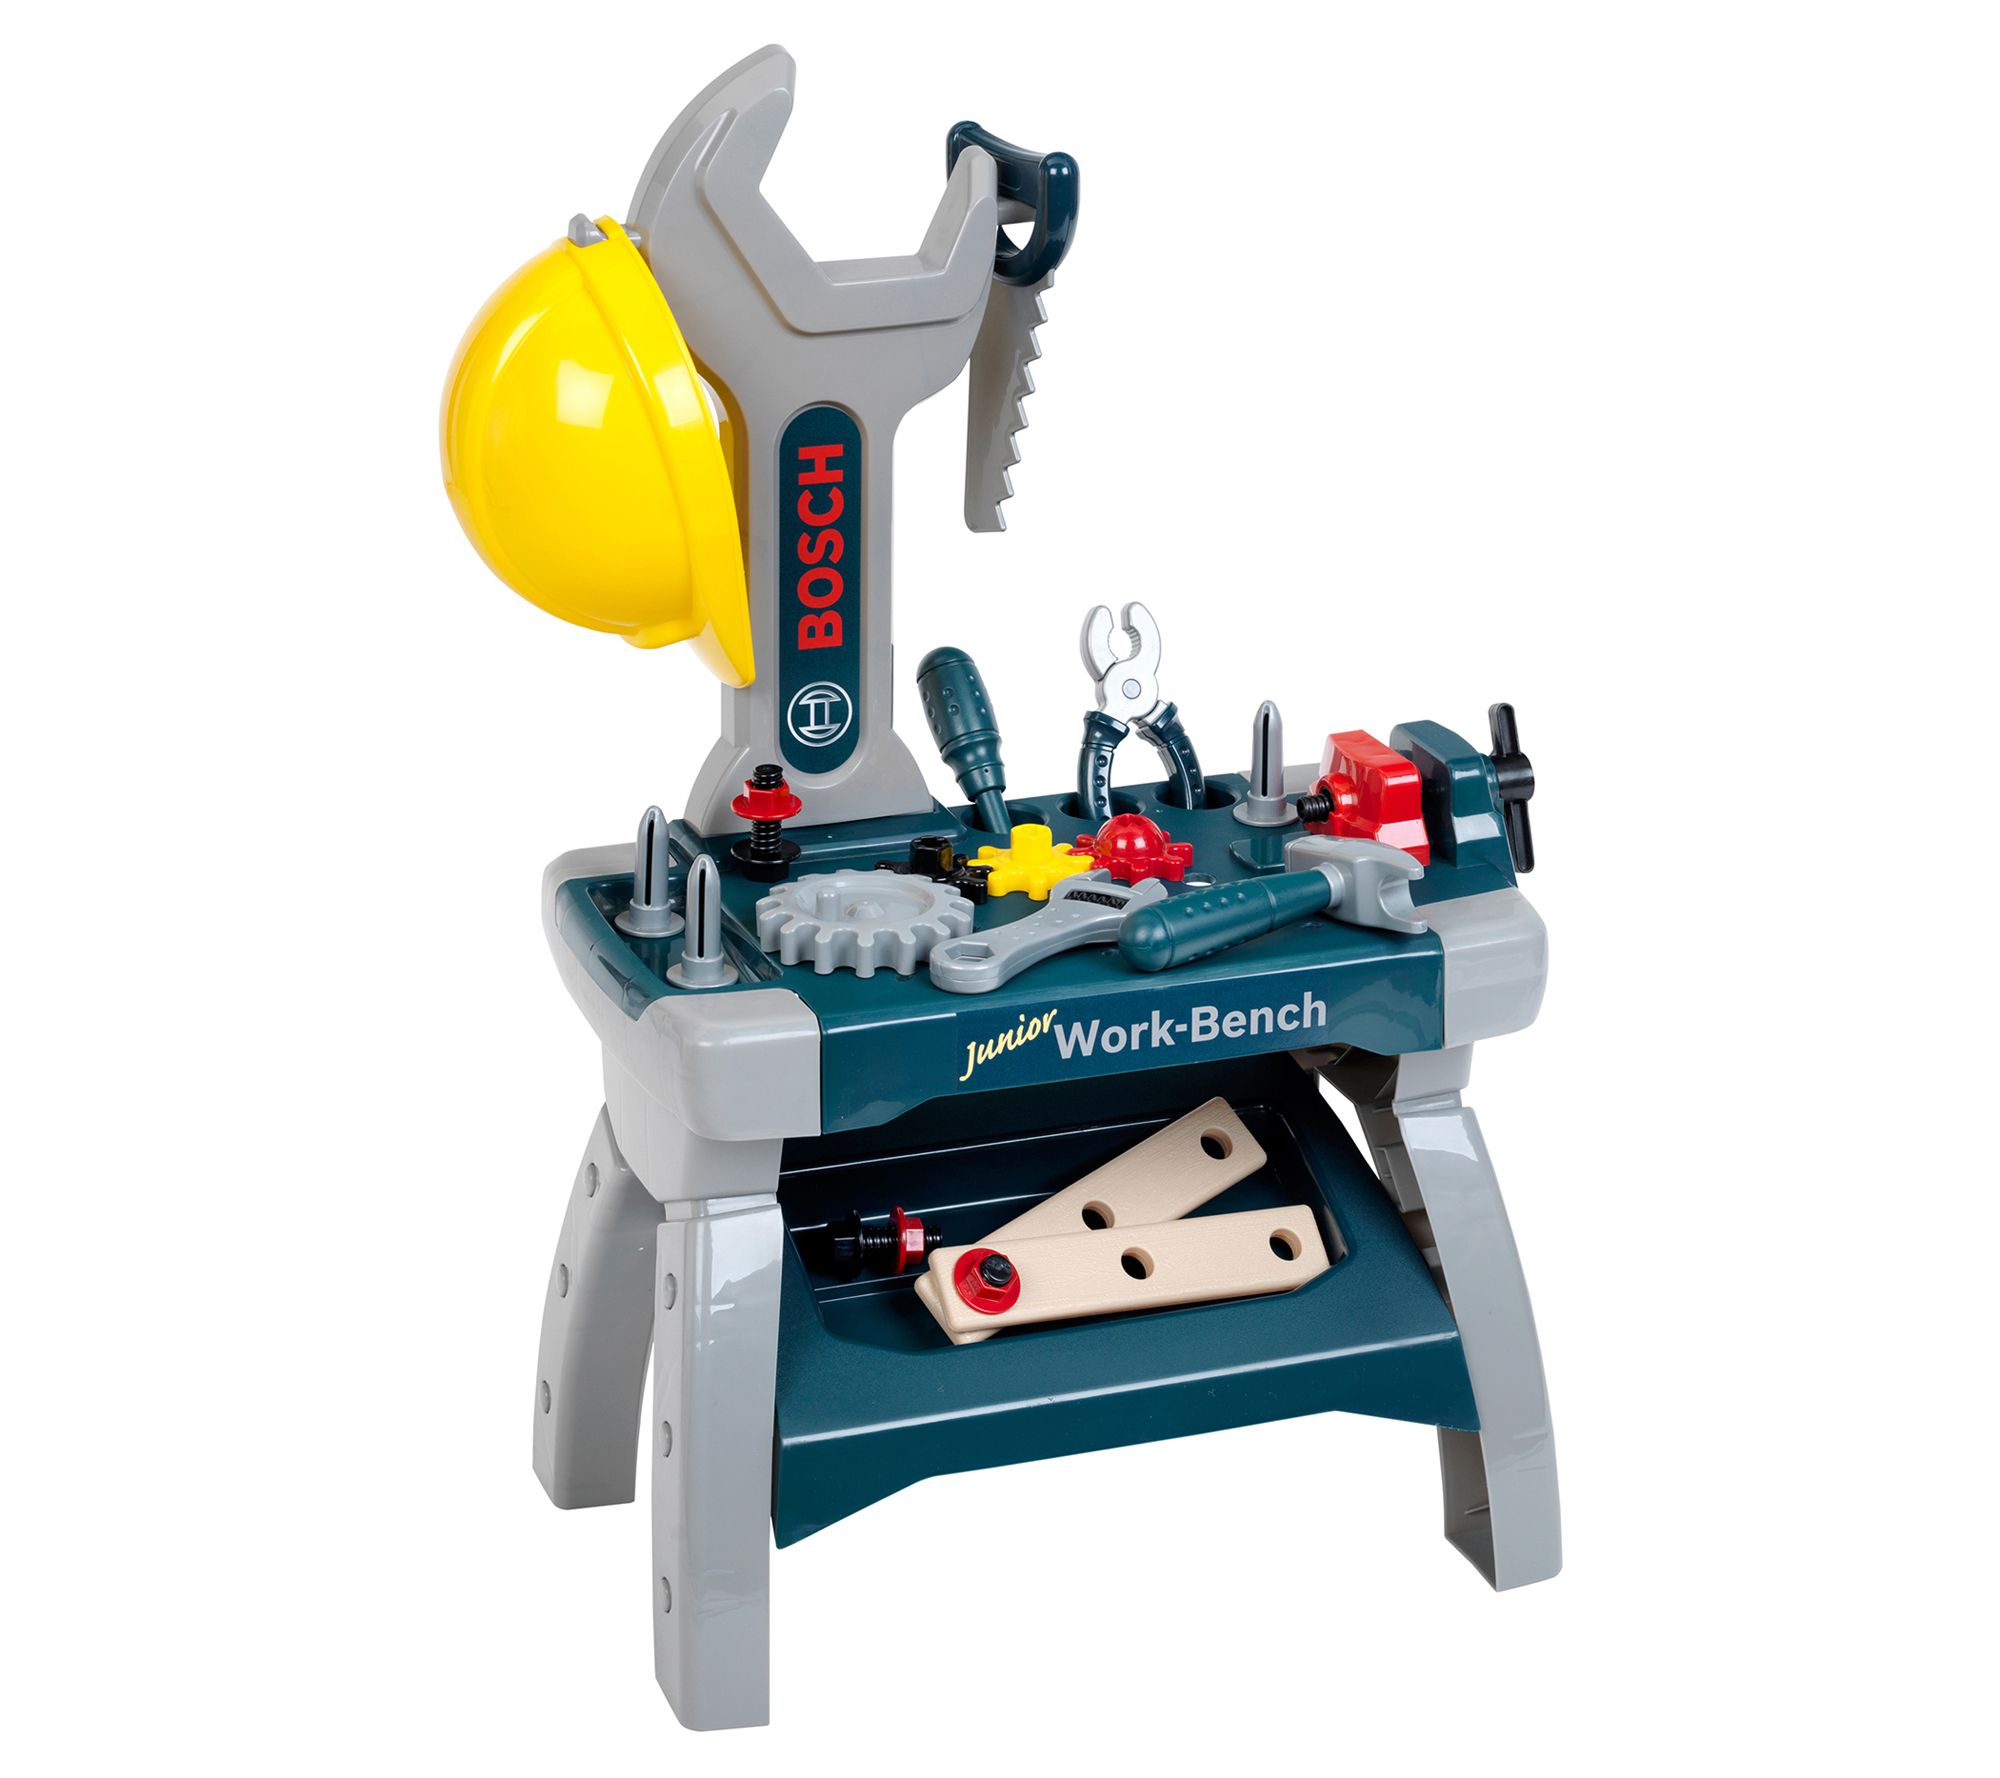 Children's Black & Decker Workbench and Tools - Toy Circle